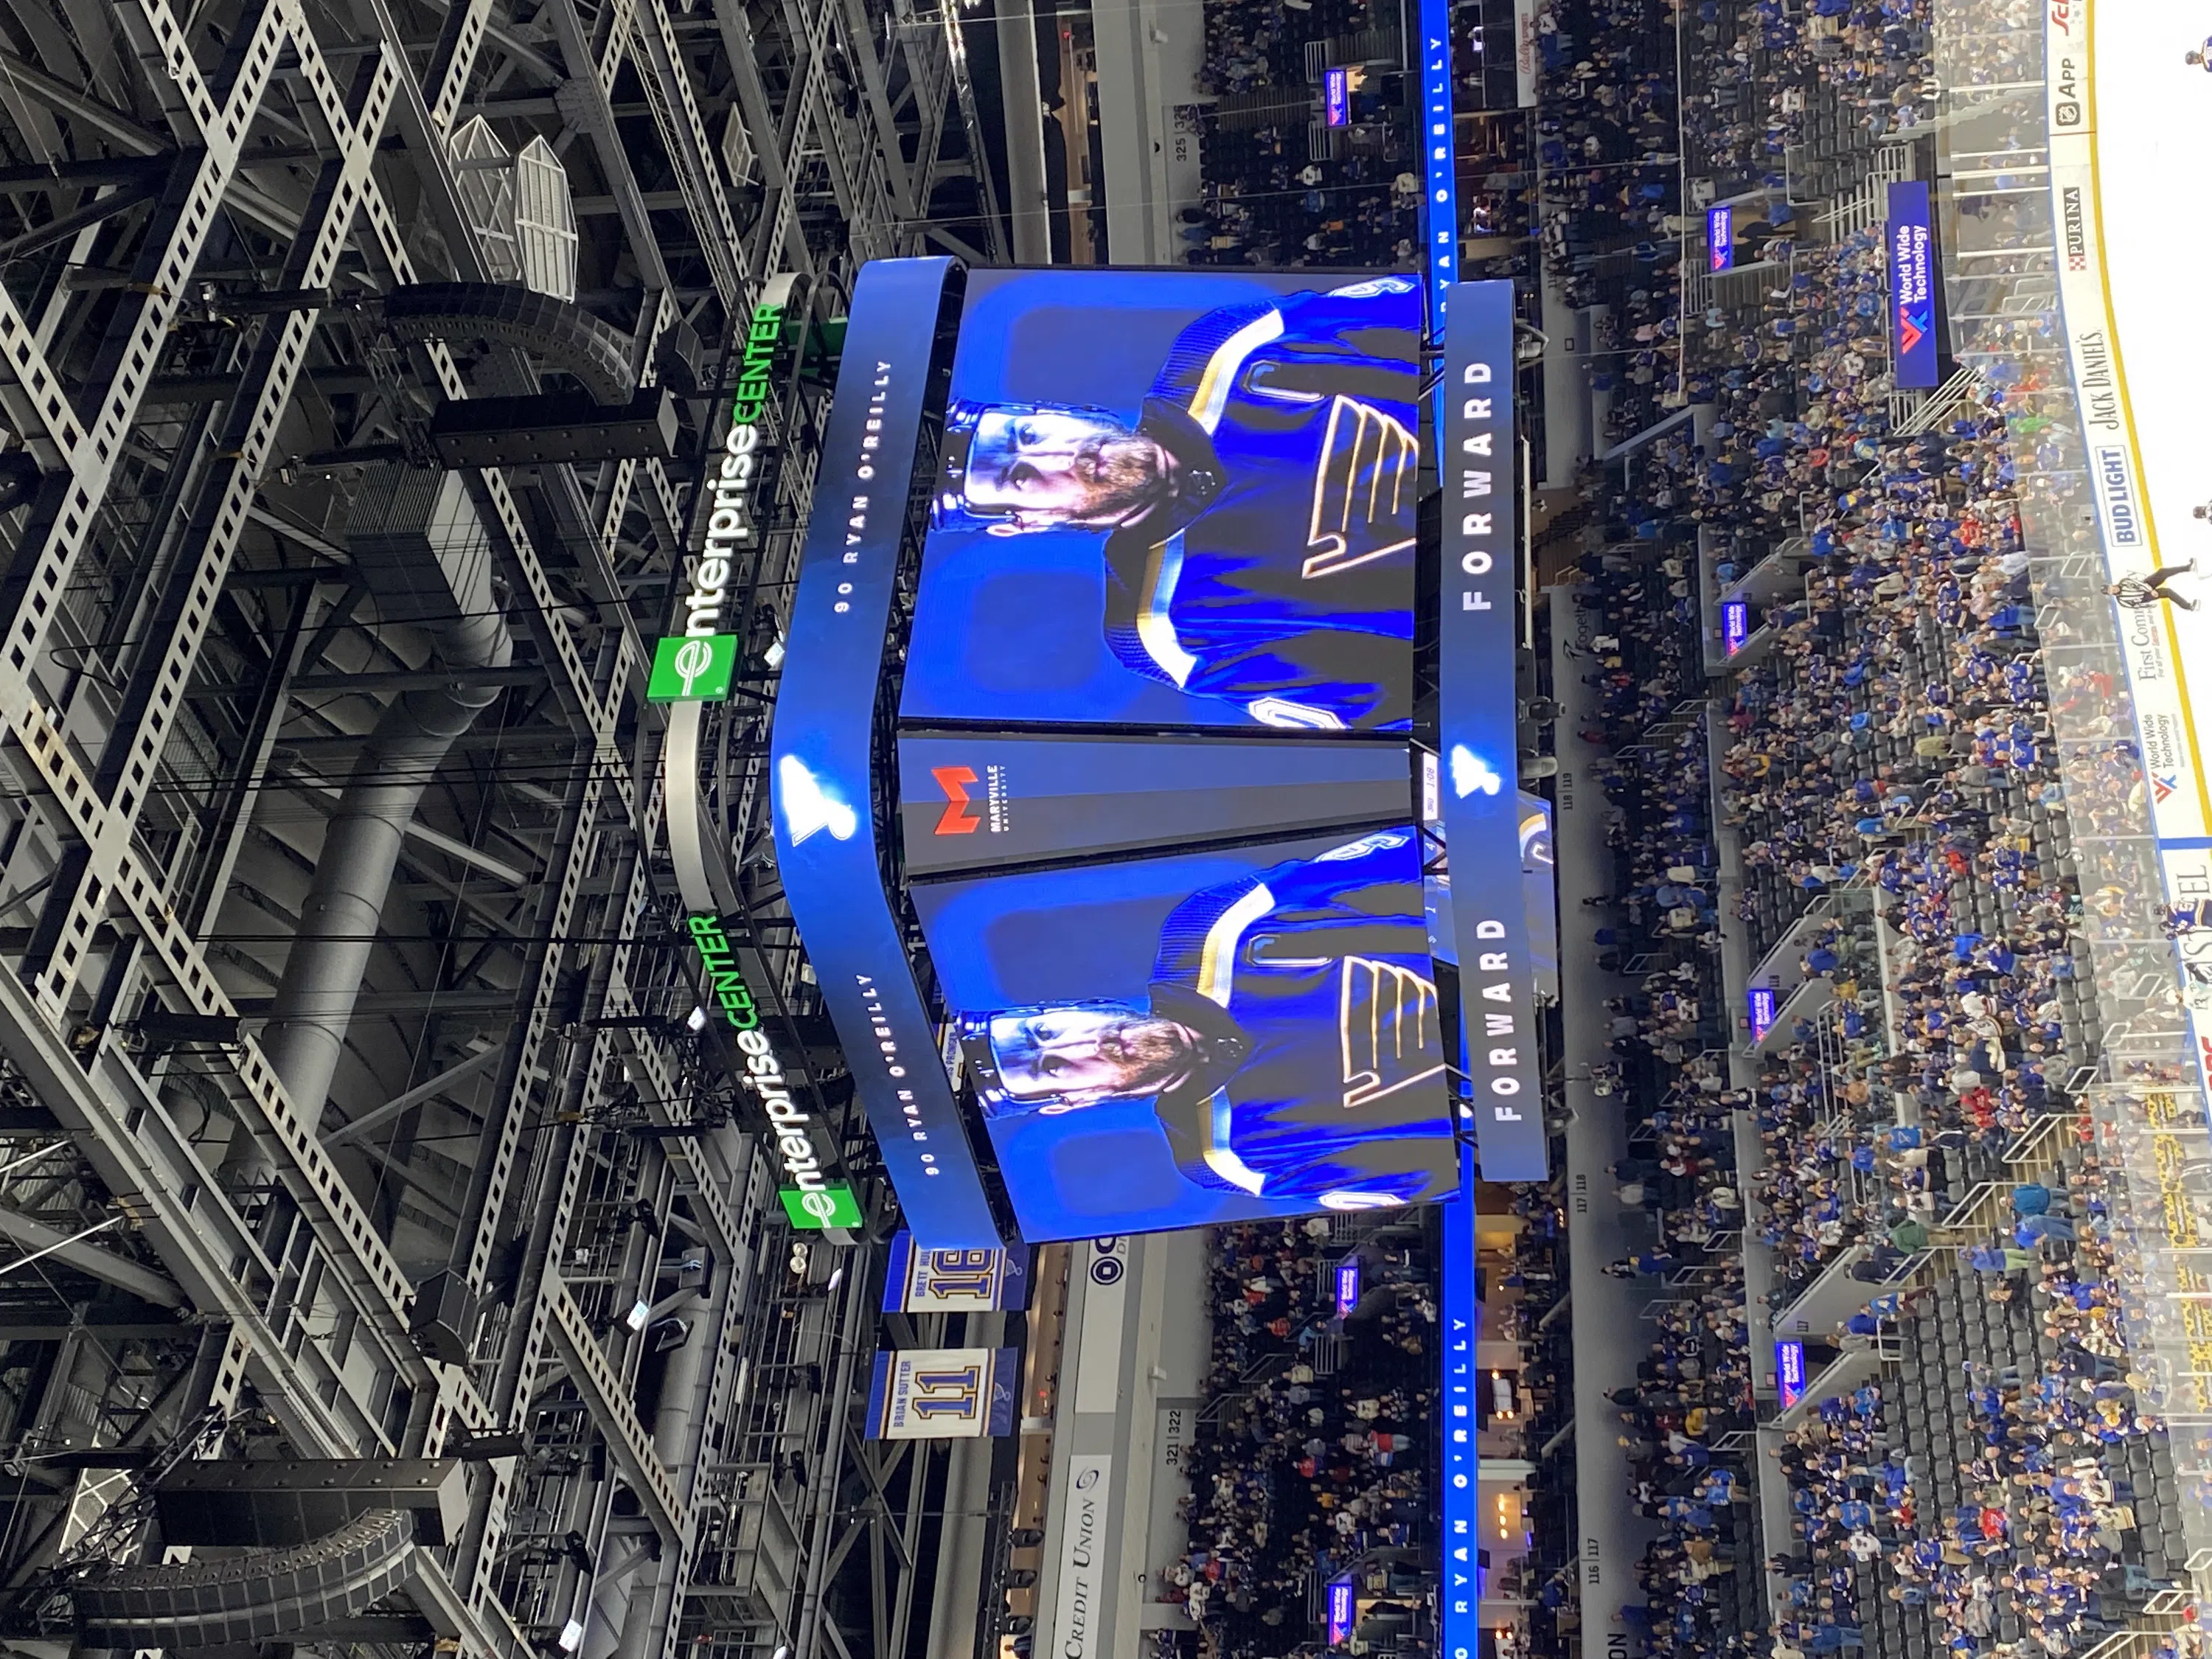 Big Red "M" on the Enterprise scoreboard at the Blues game